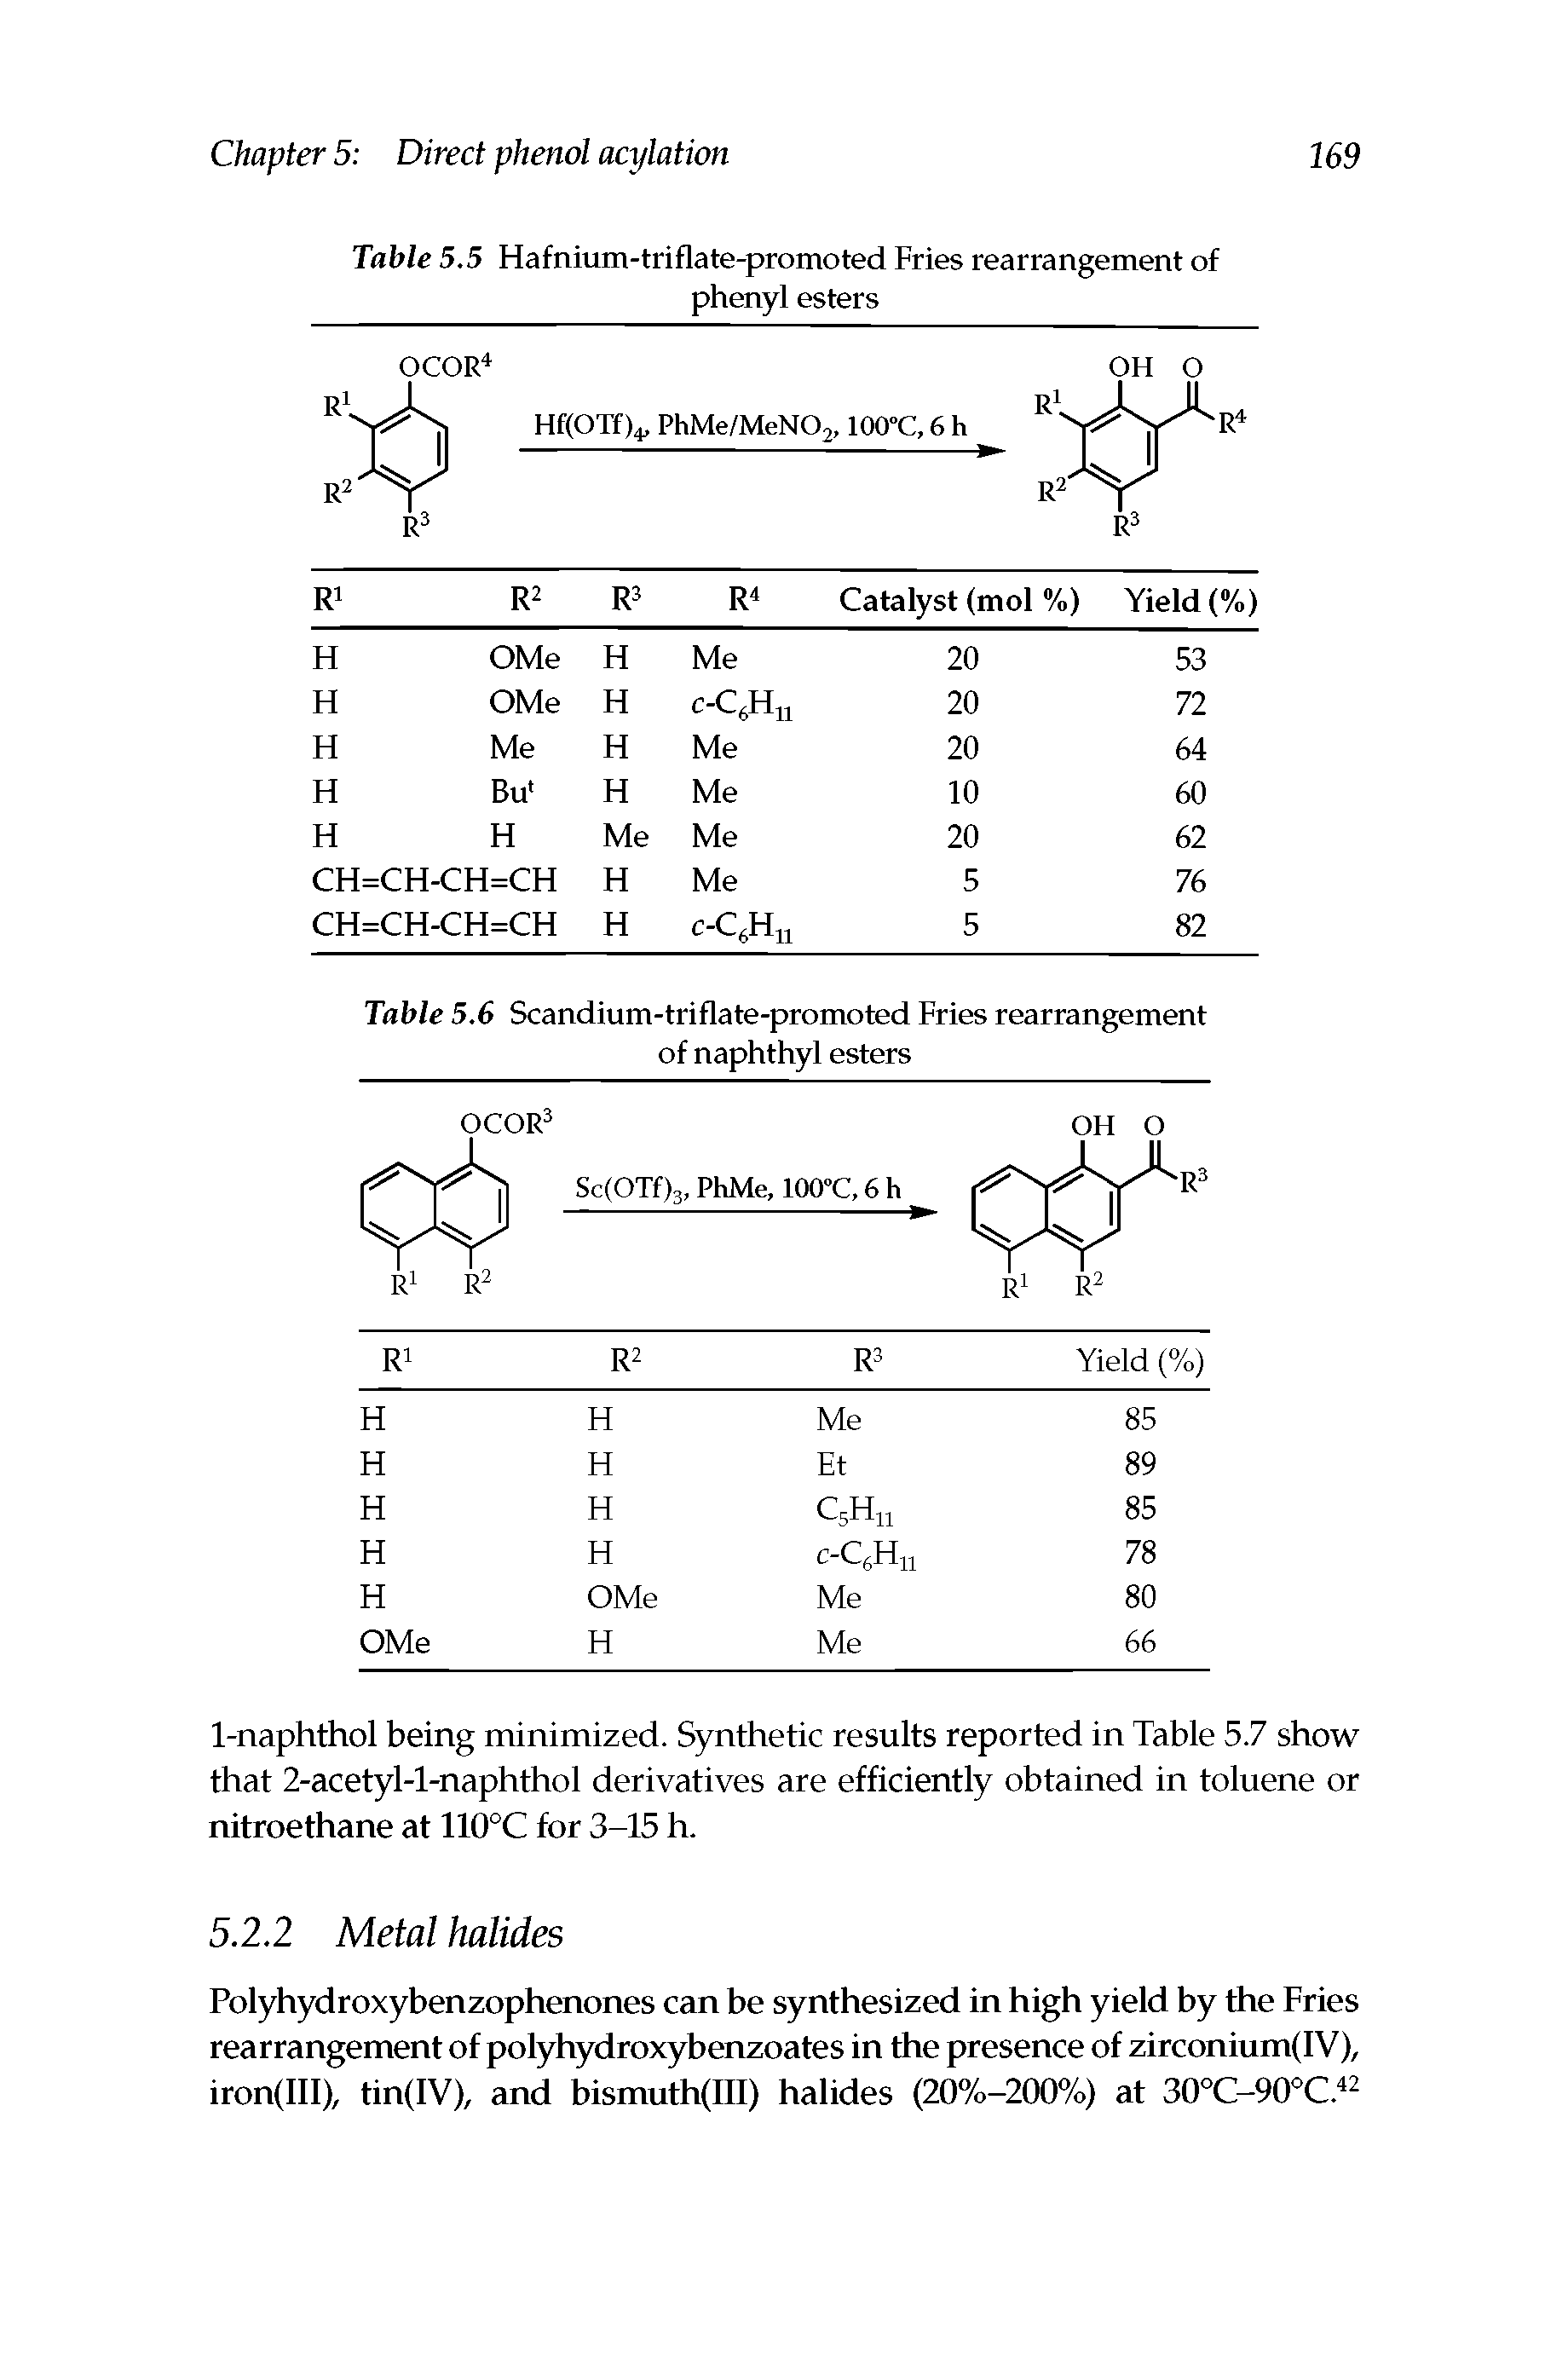 Table 5.6 Scandium-triflate-promoted Fries rearrangement of naphthyl esters...